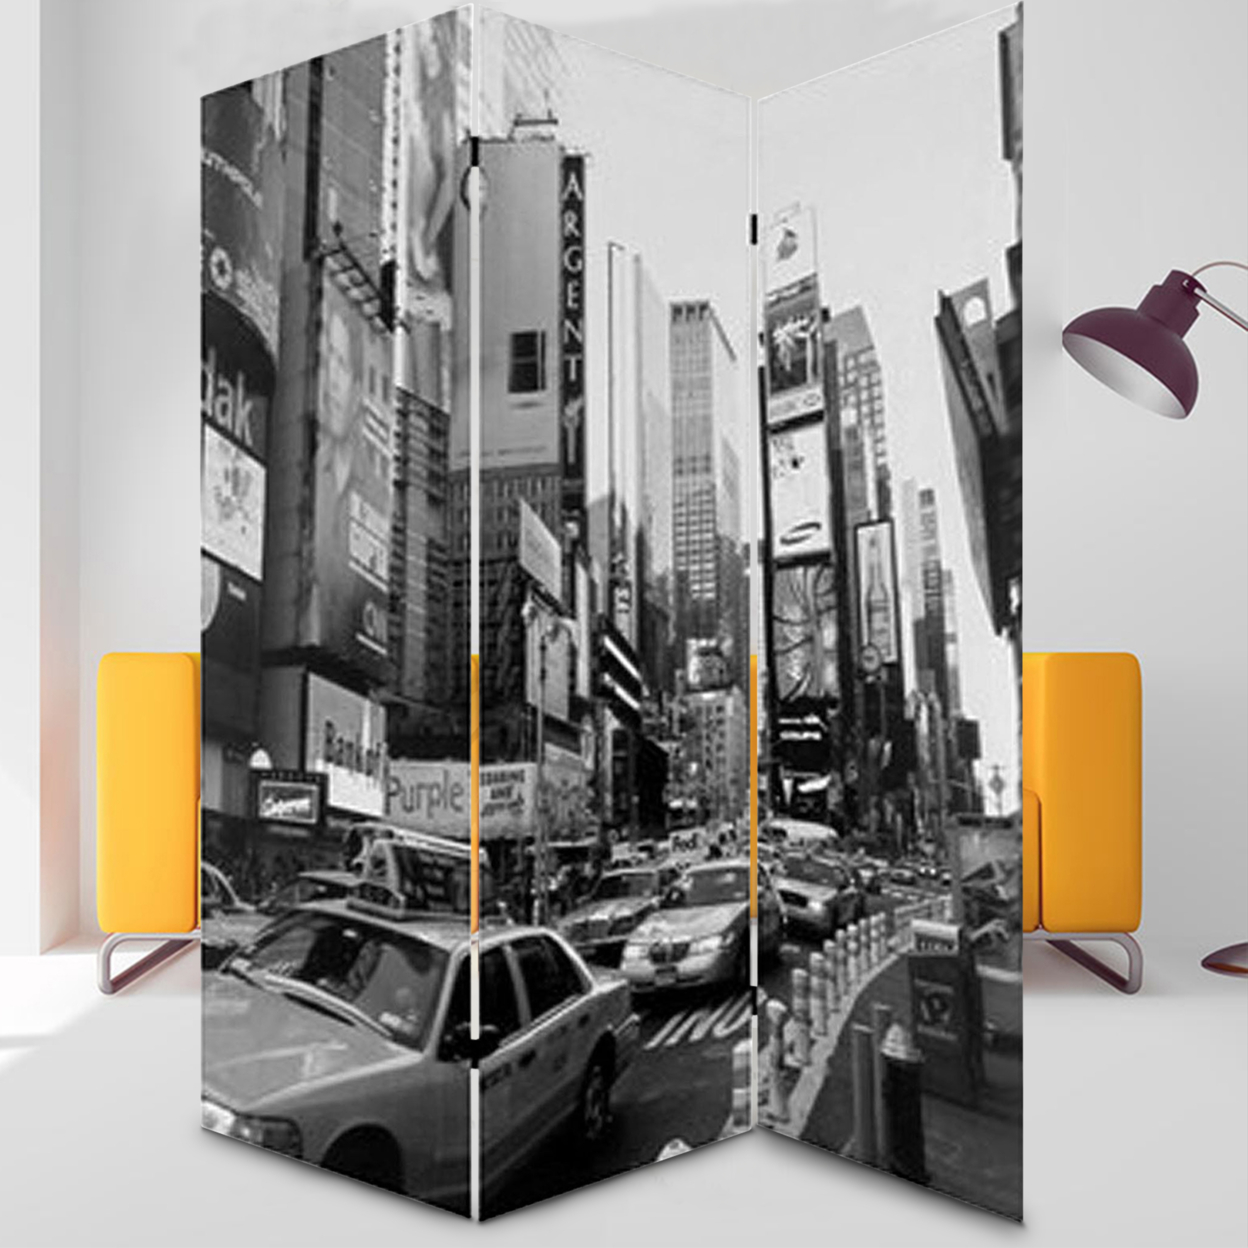 3 Panel Foldable Canvas Screen With NYC Print, Black And White- Saltoro Sherpi